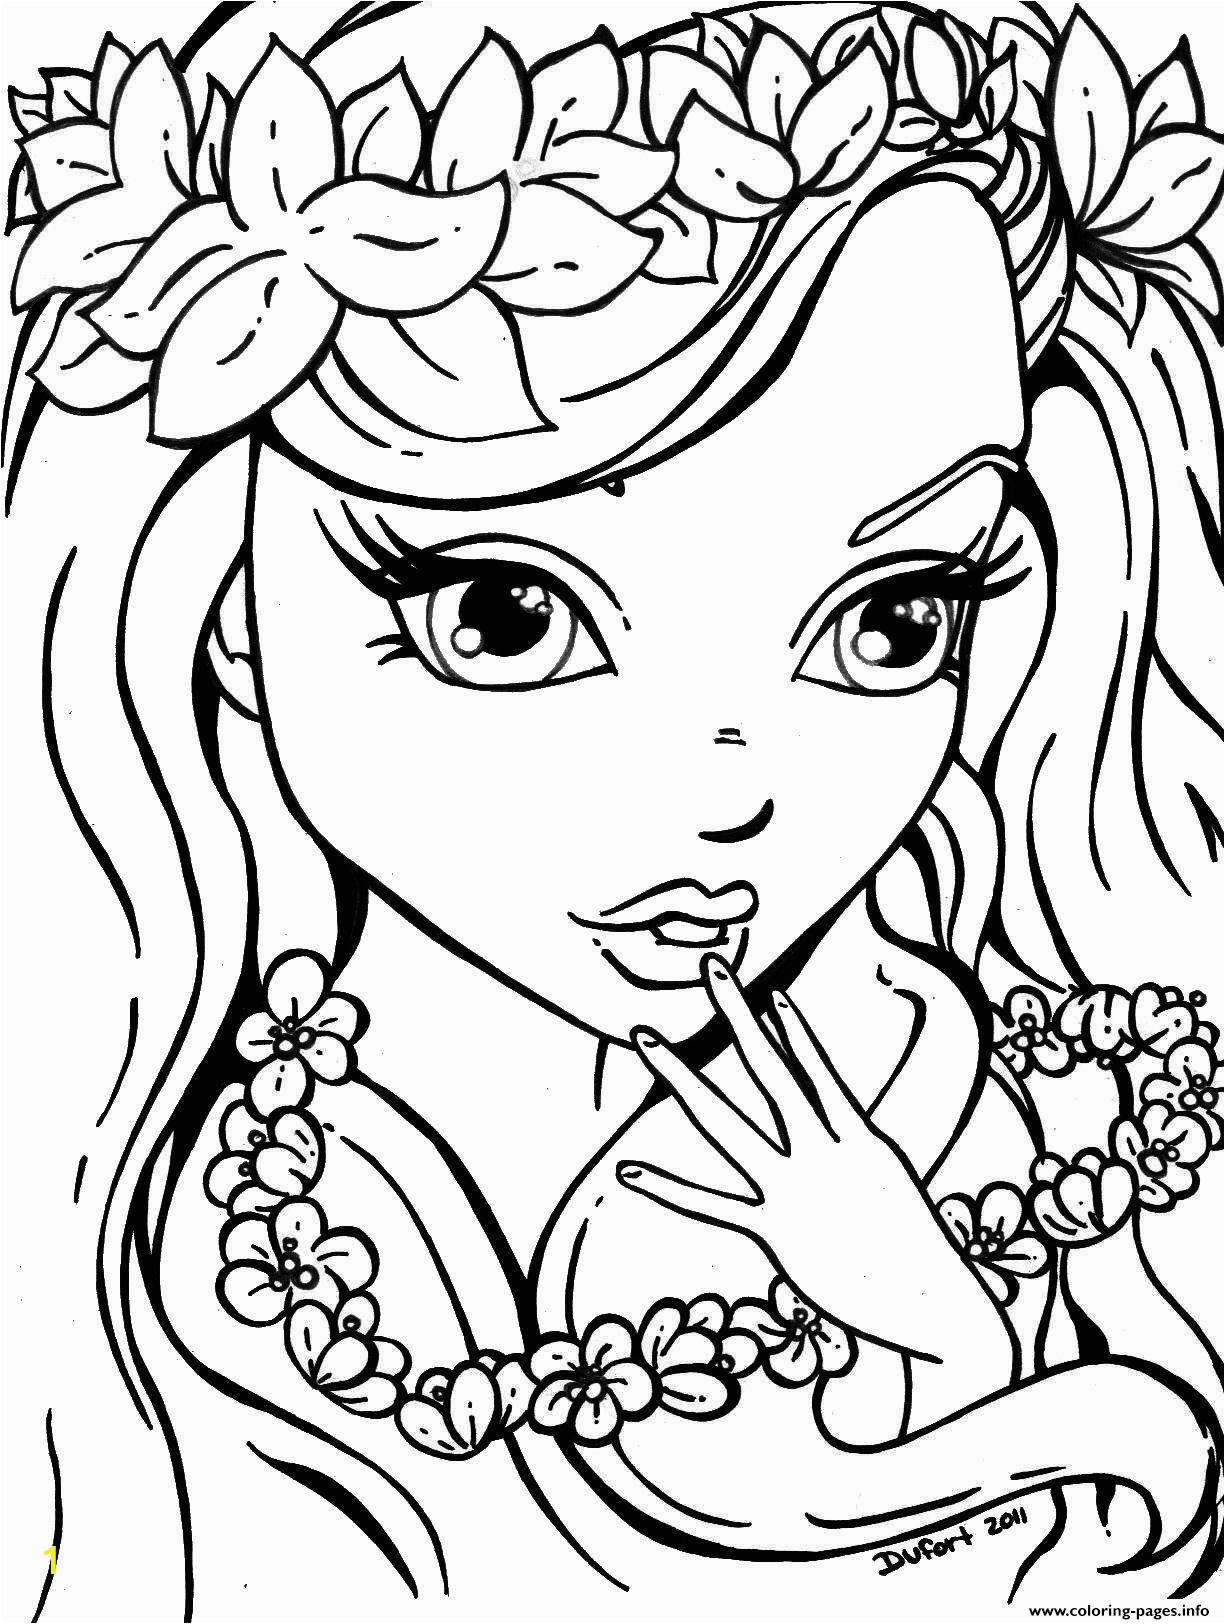 Coloring Pages for Teenage Girl Online Cute Girls for Teens Coloring Pages Printable